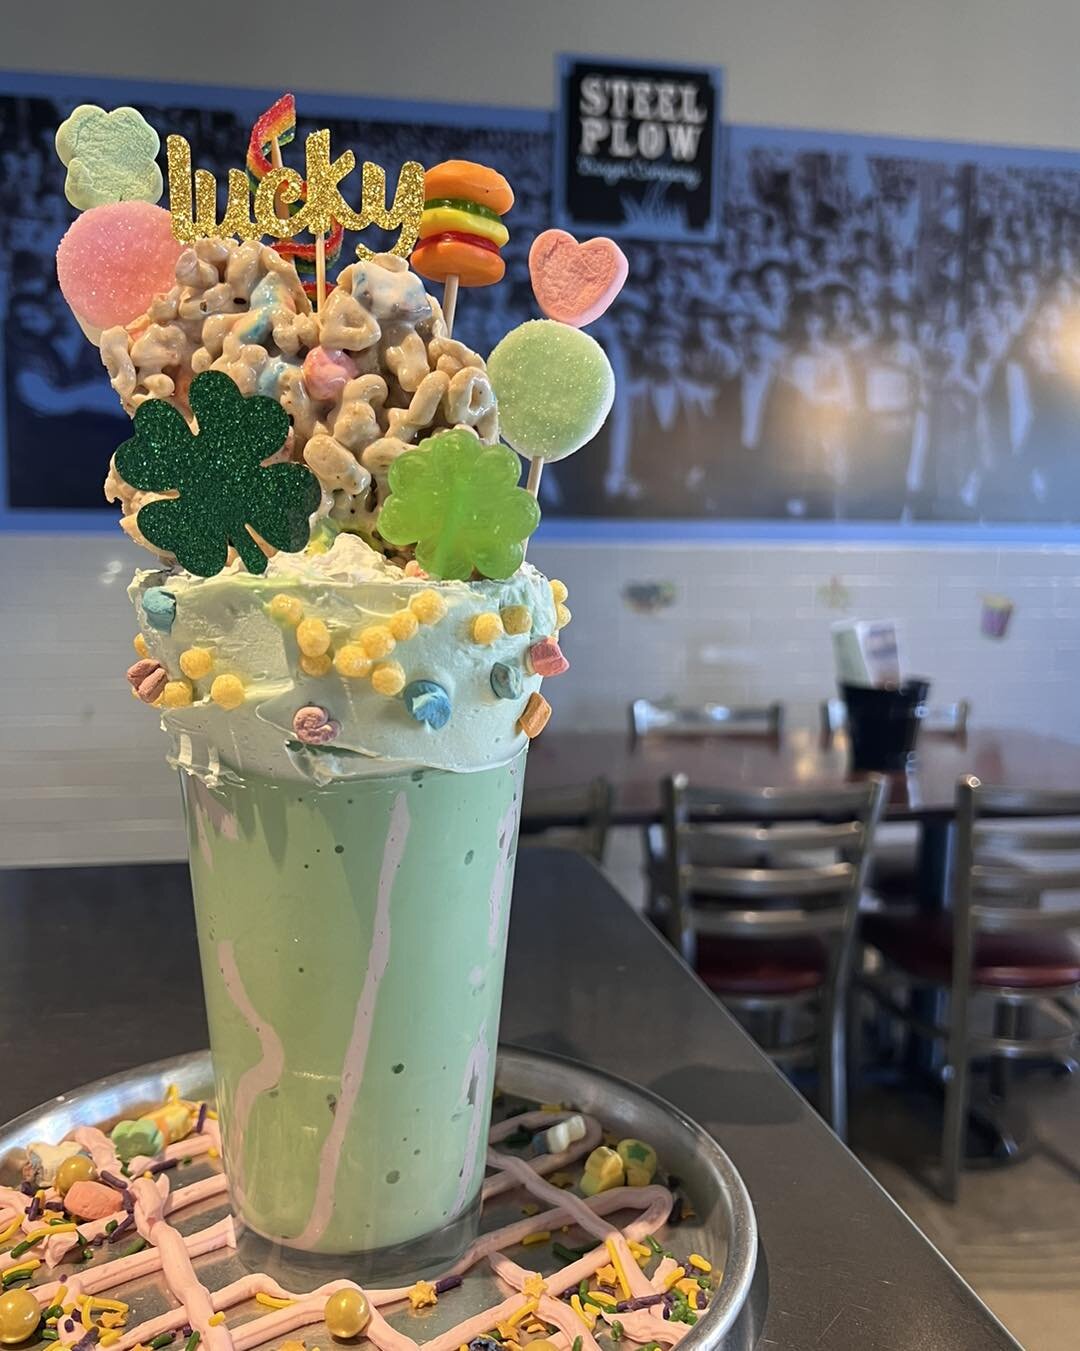 🍀Celebrate St. Patrick&rsquo;s Day with us!🍀

The Lucky Charm Shake, The Irish Buck cocktail, and The Patty&rsquo;s Day Melt are three you won&rsquo;t want to miss!